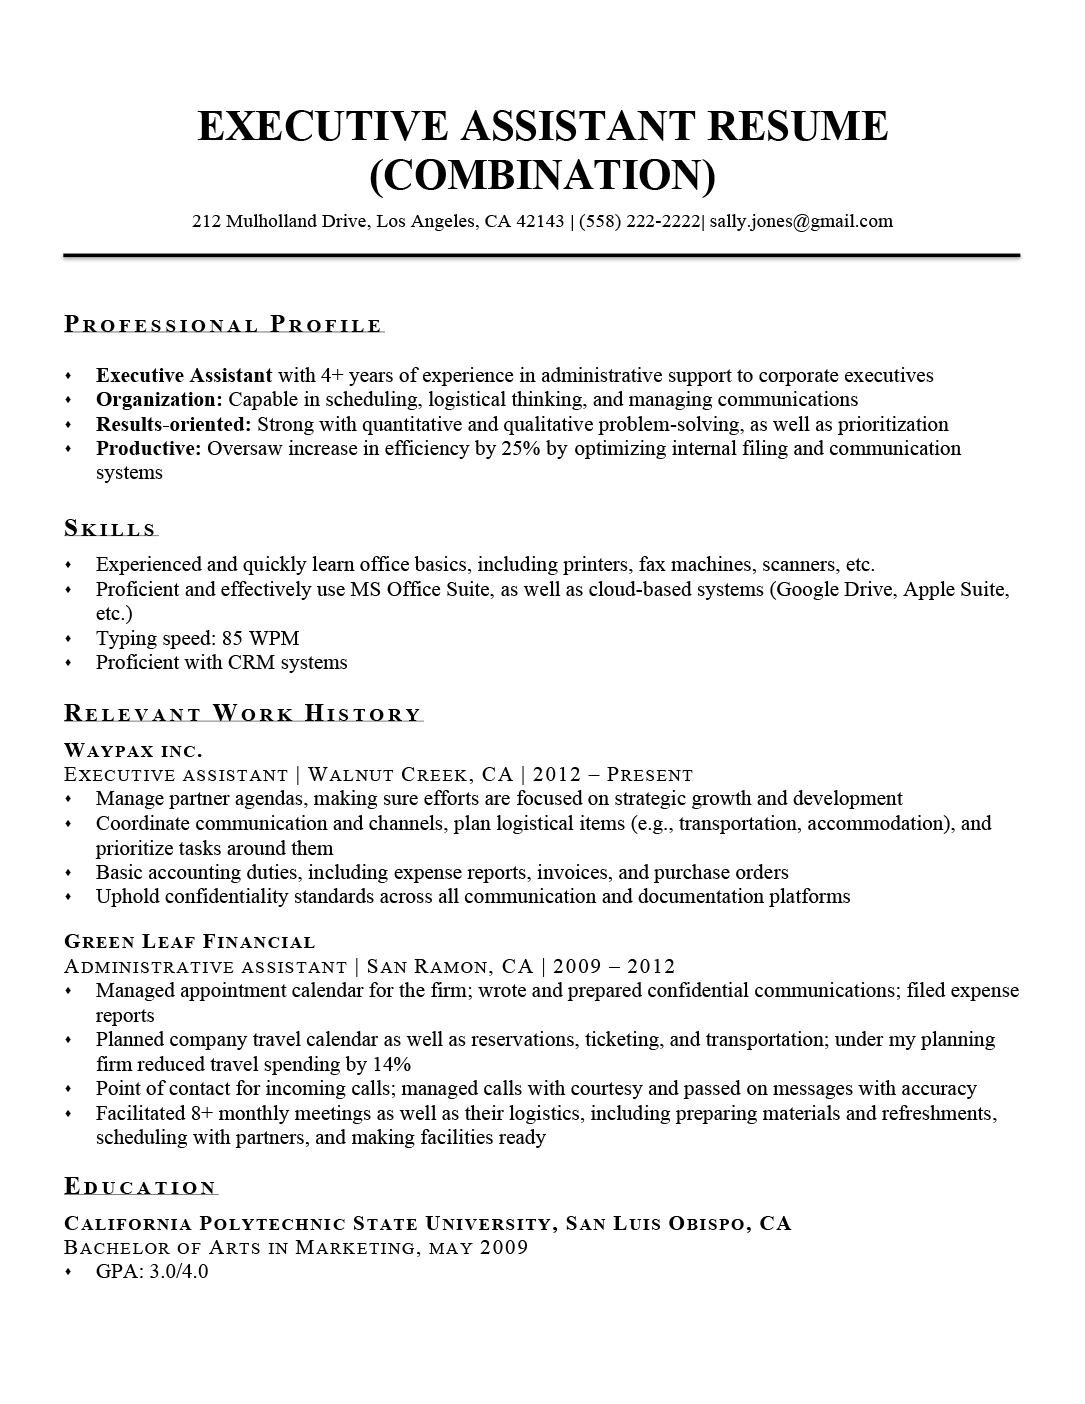 Executive assistant resume sample